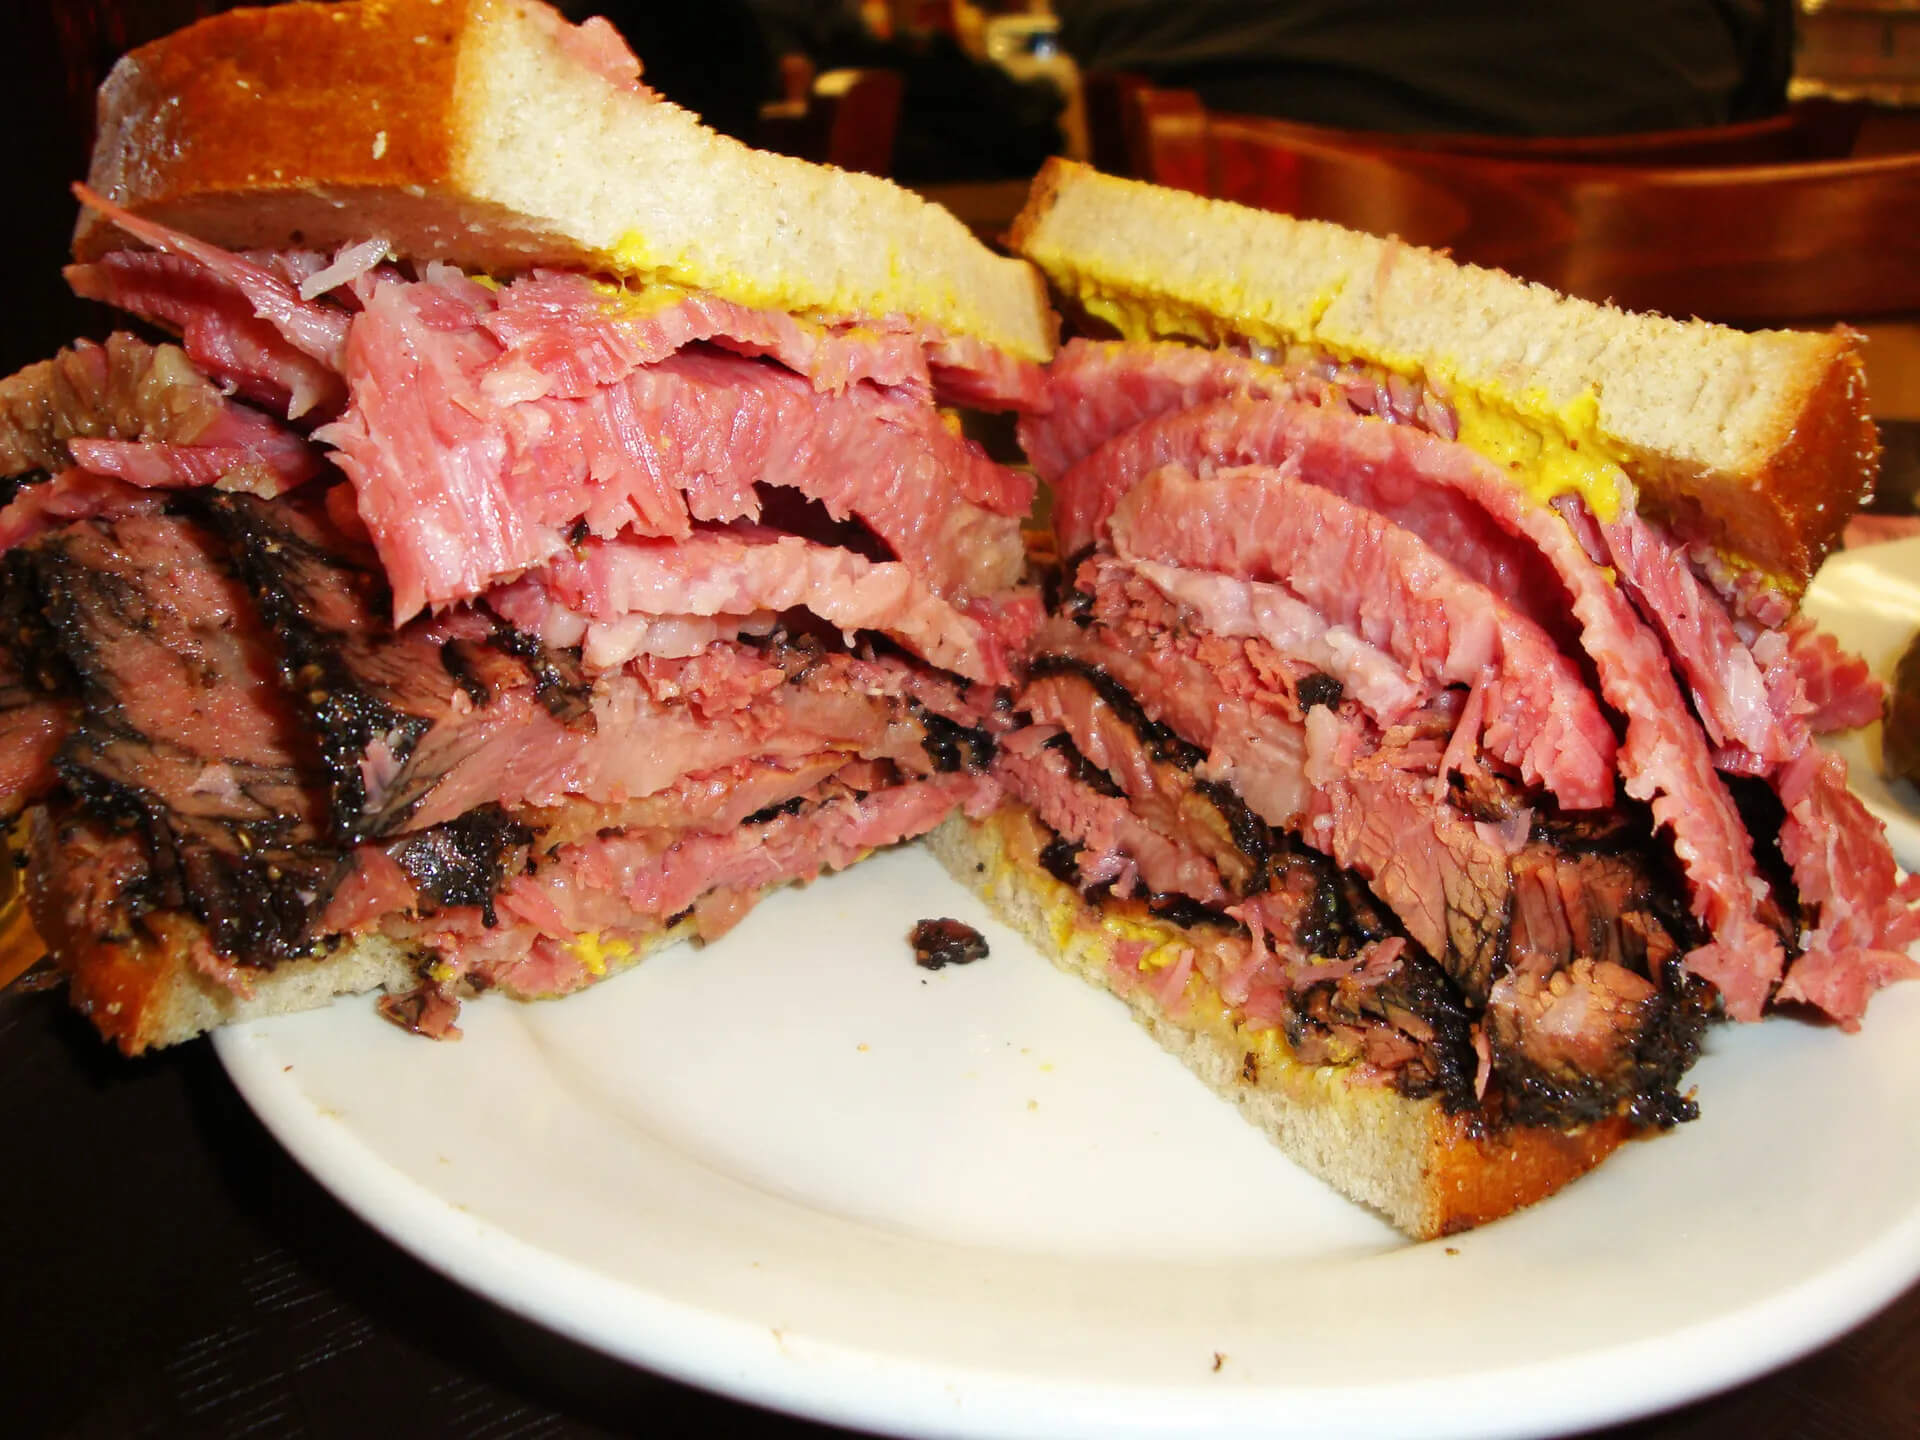 food open late. Katz’s Delicatessen is famous for its thick-cut pastrami sandwich